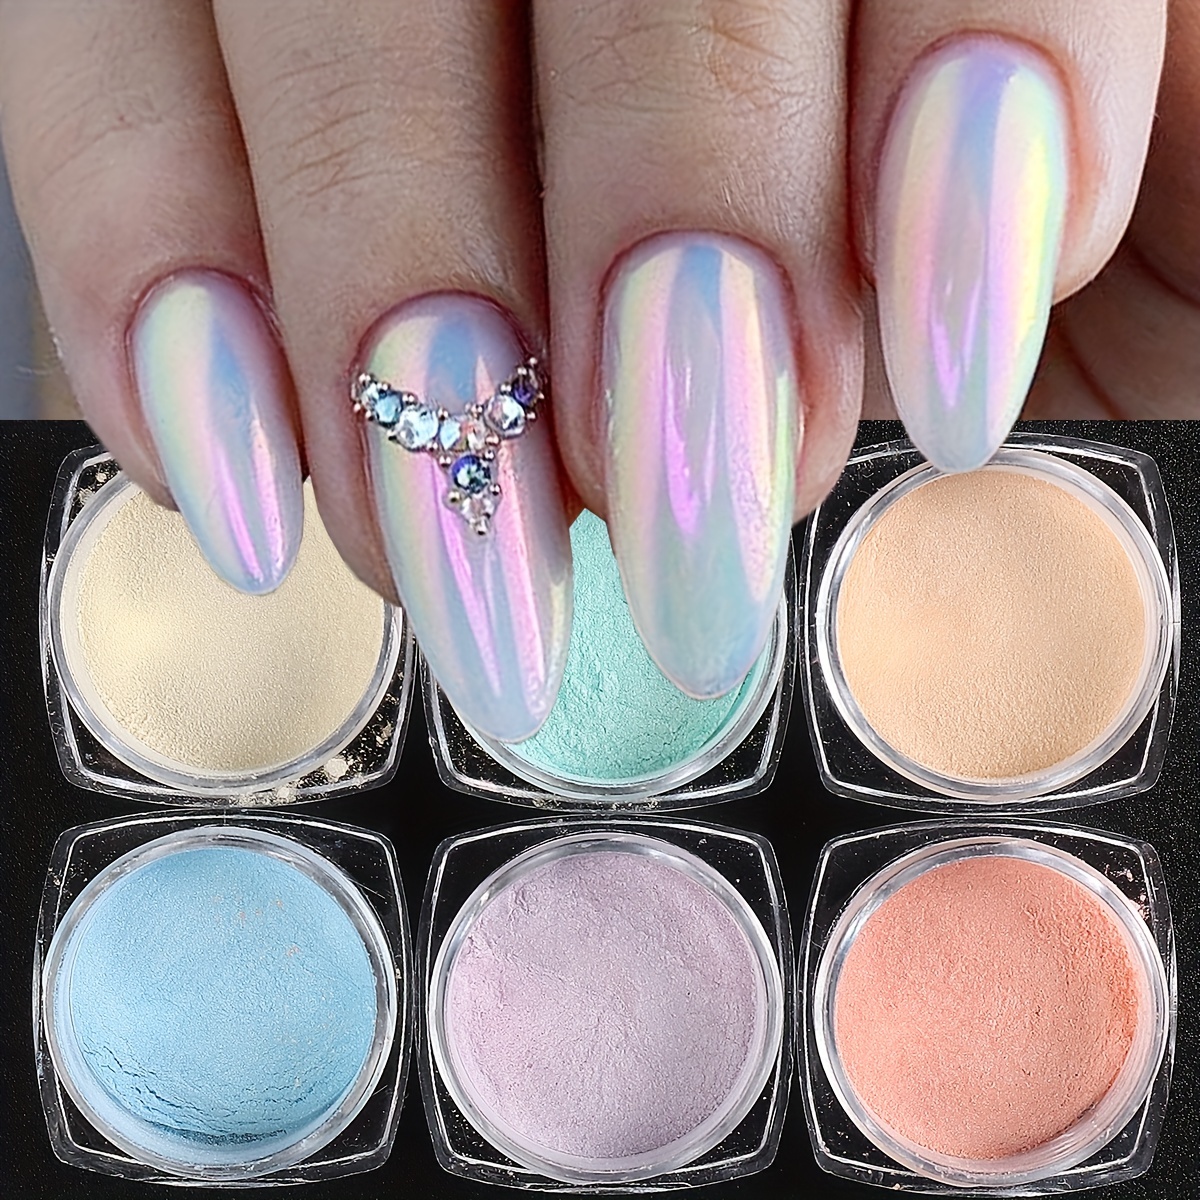 Chrome Nail Powder-Pearl Chrome Powder For Nails Kit Of 9 Pcs Iridescent  Nail Powder for DIY Manicure Decals